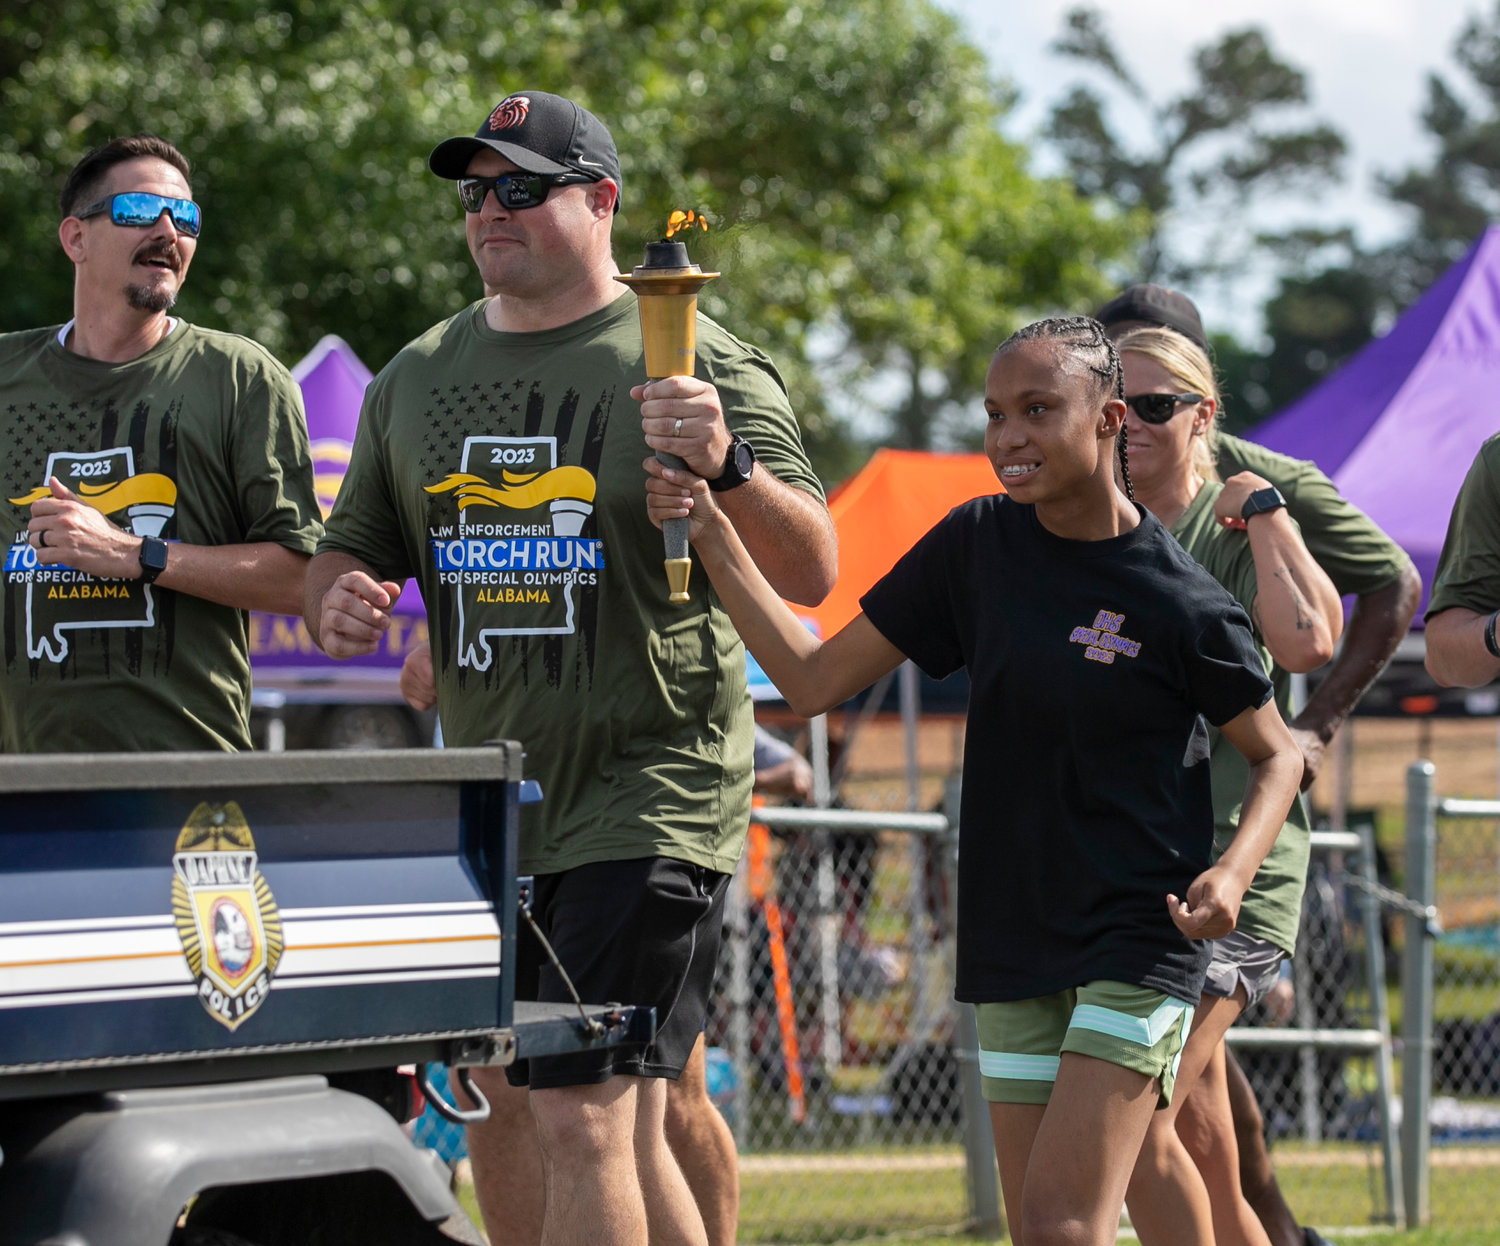 JaMaya Smith from Daphne High School runs the anchor of the torch run relay which closed Thursday’s opening ceremonies at the Baldwin County Spring Games in Fairhope.